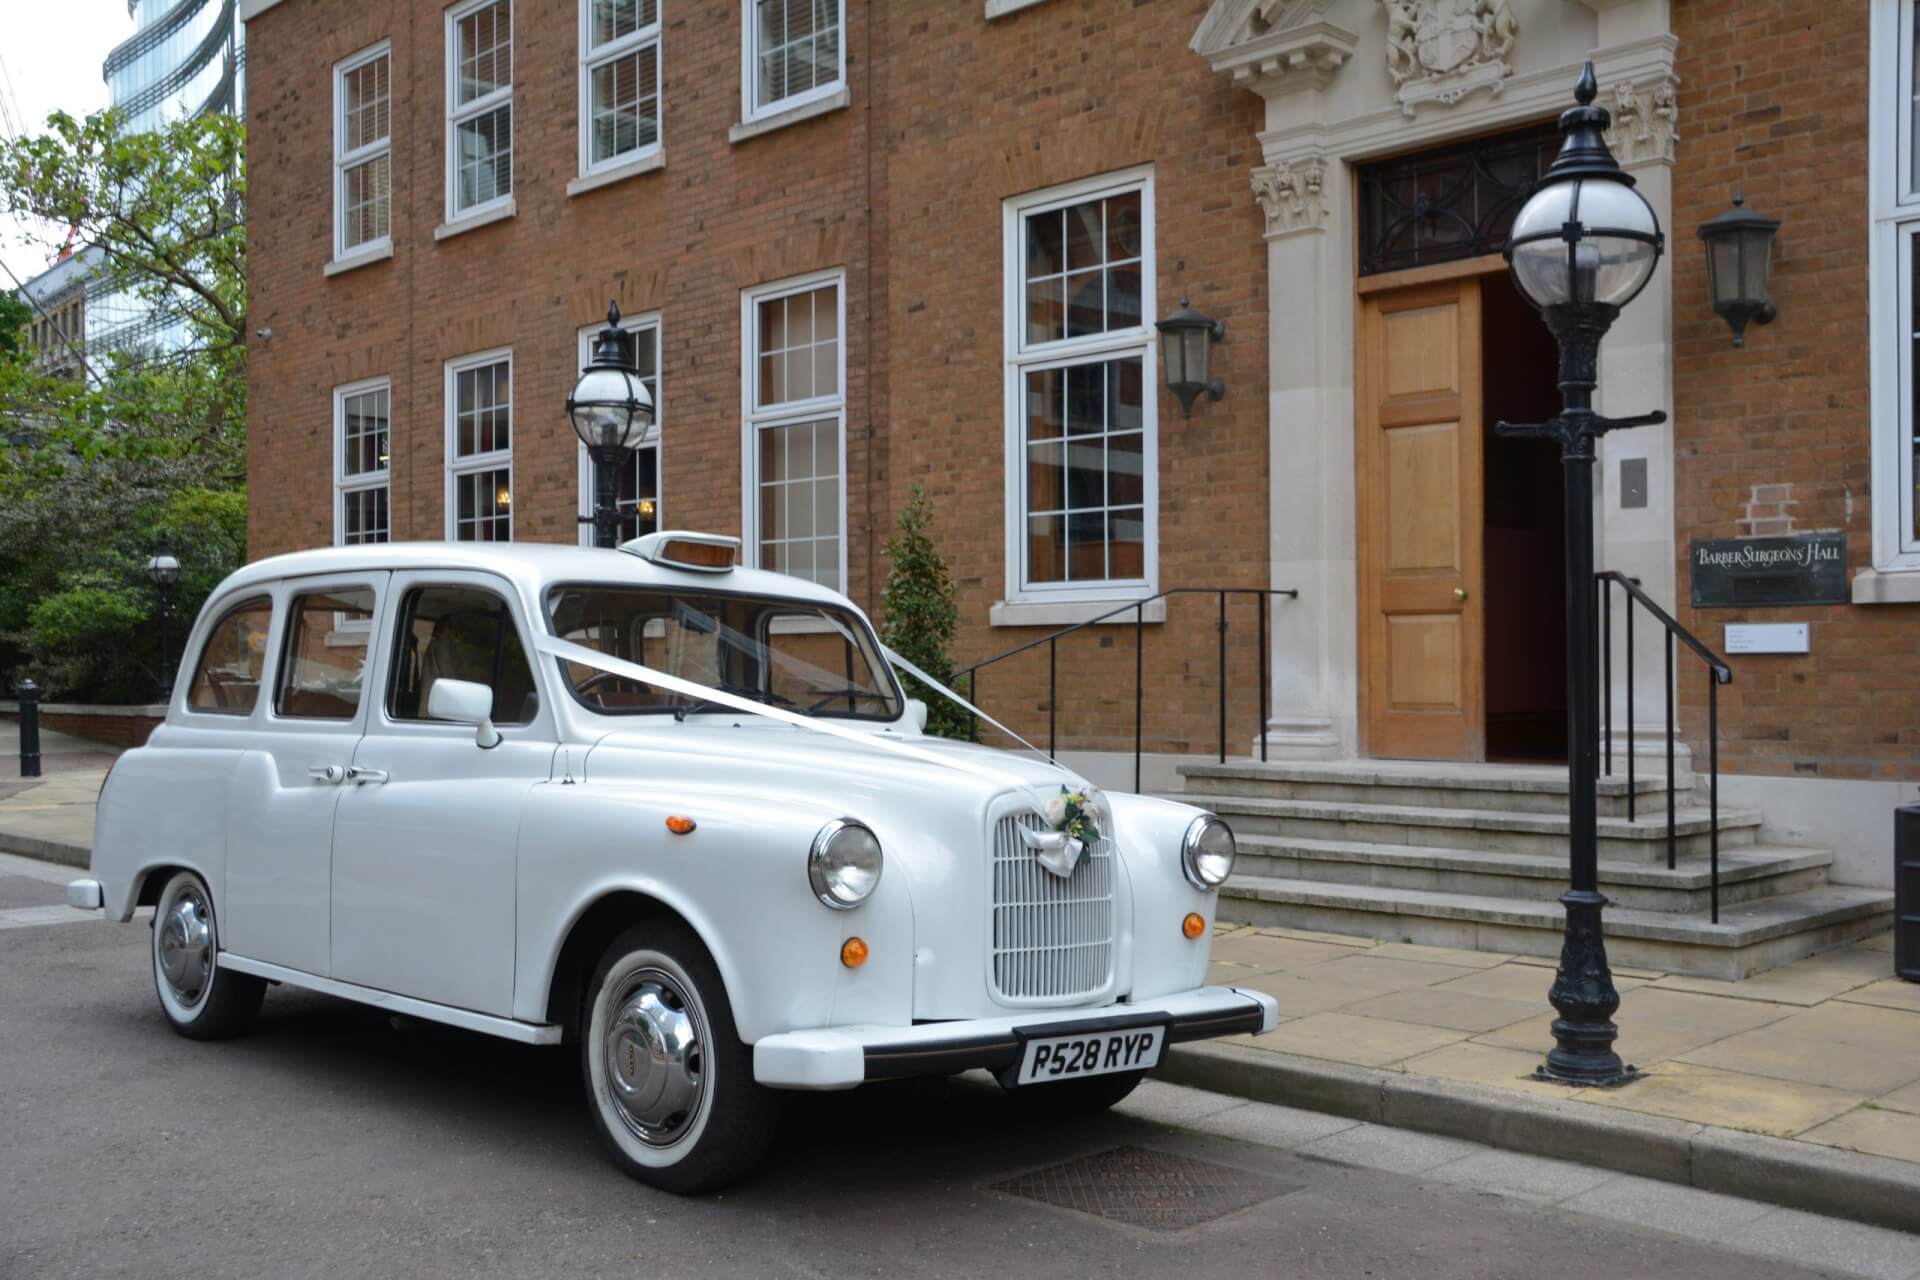 WHITE LONDON TAXI HIRE